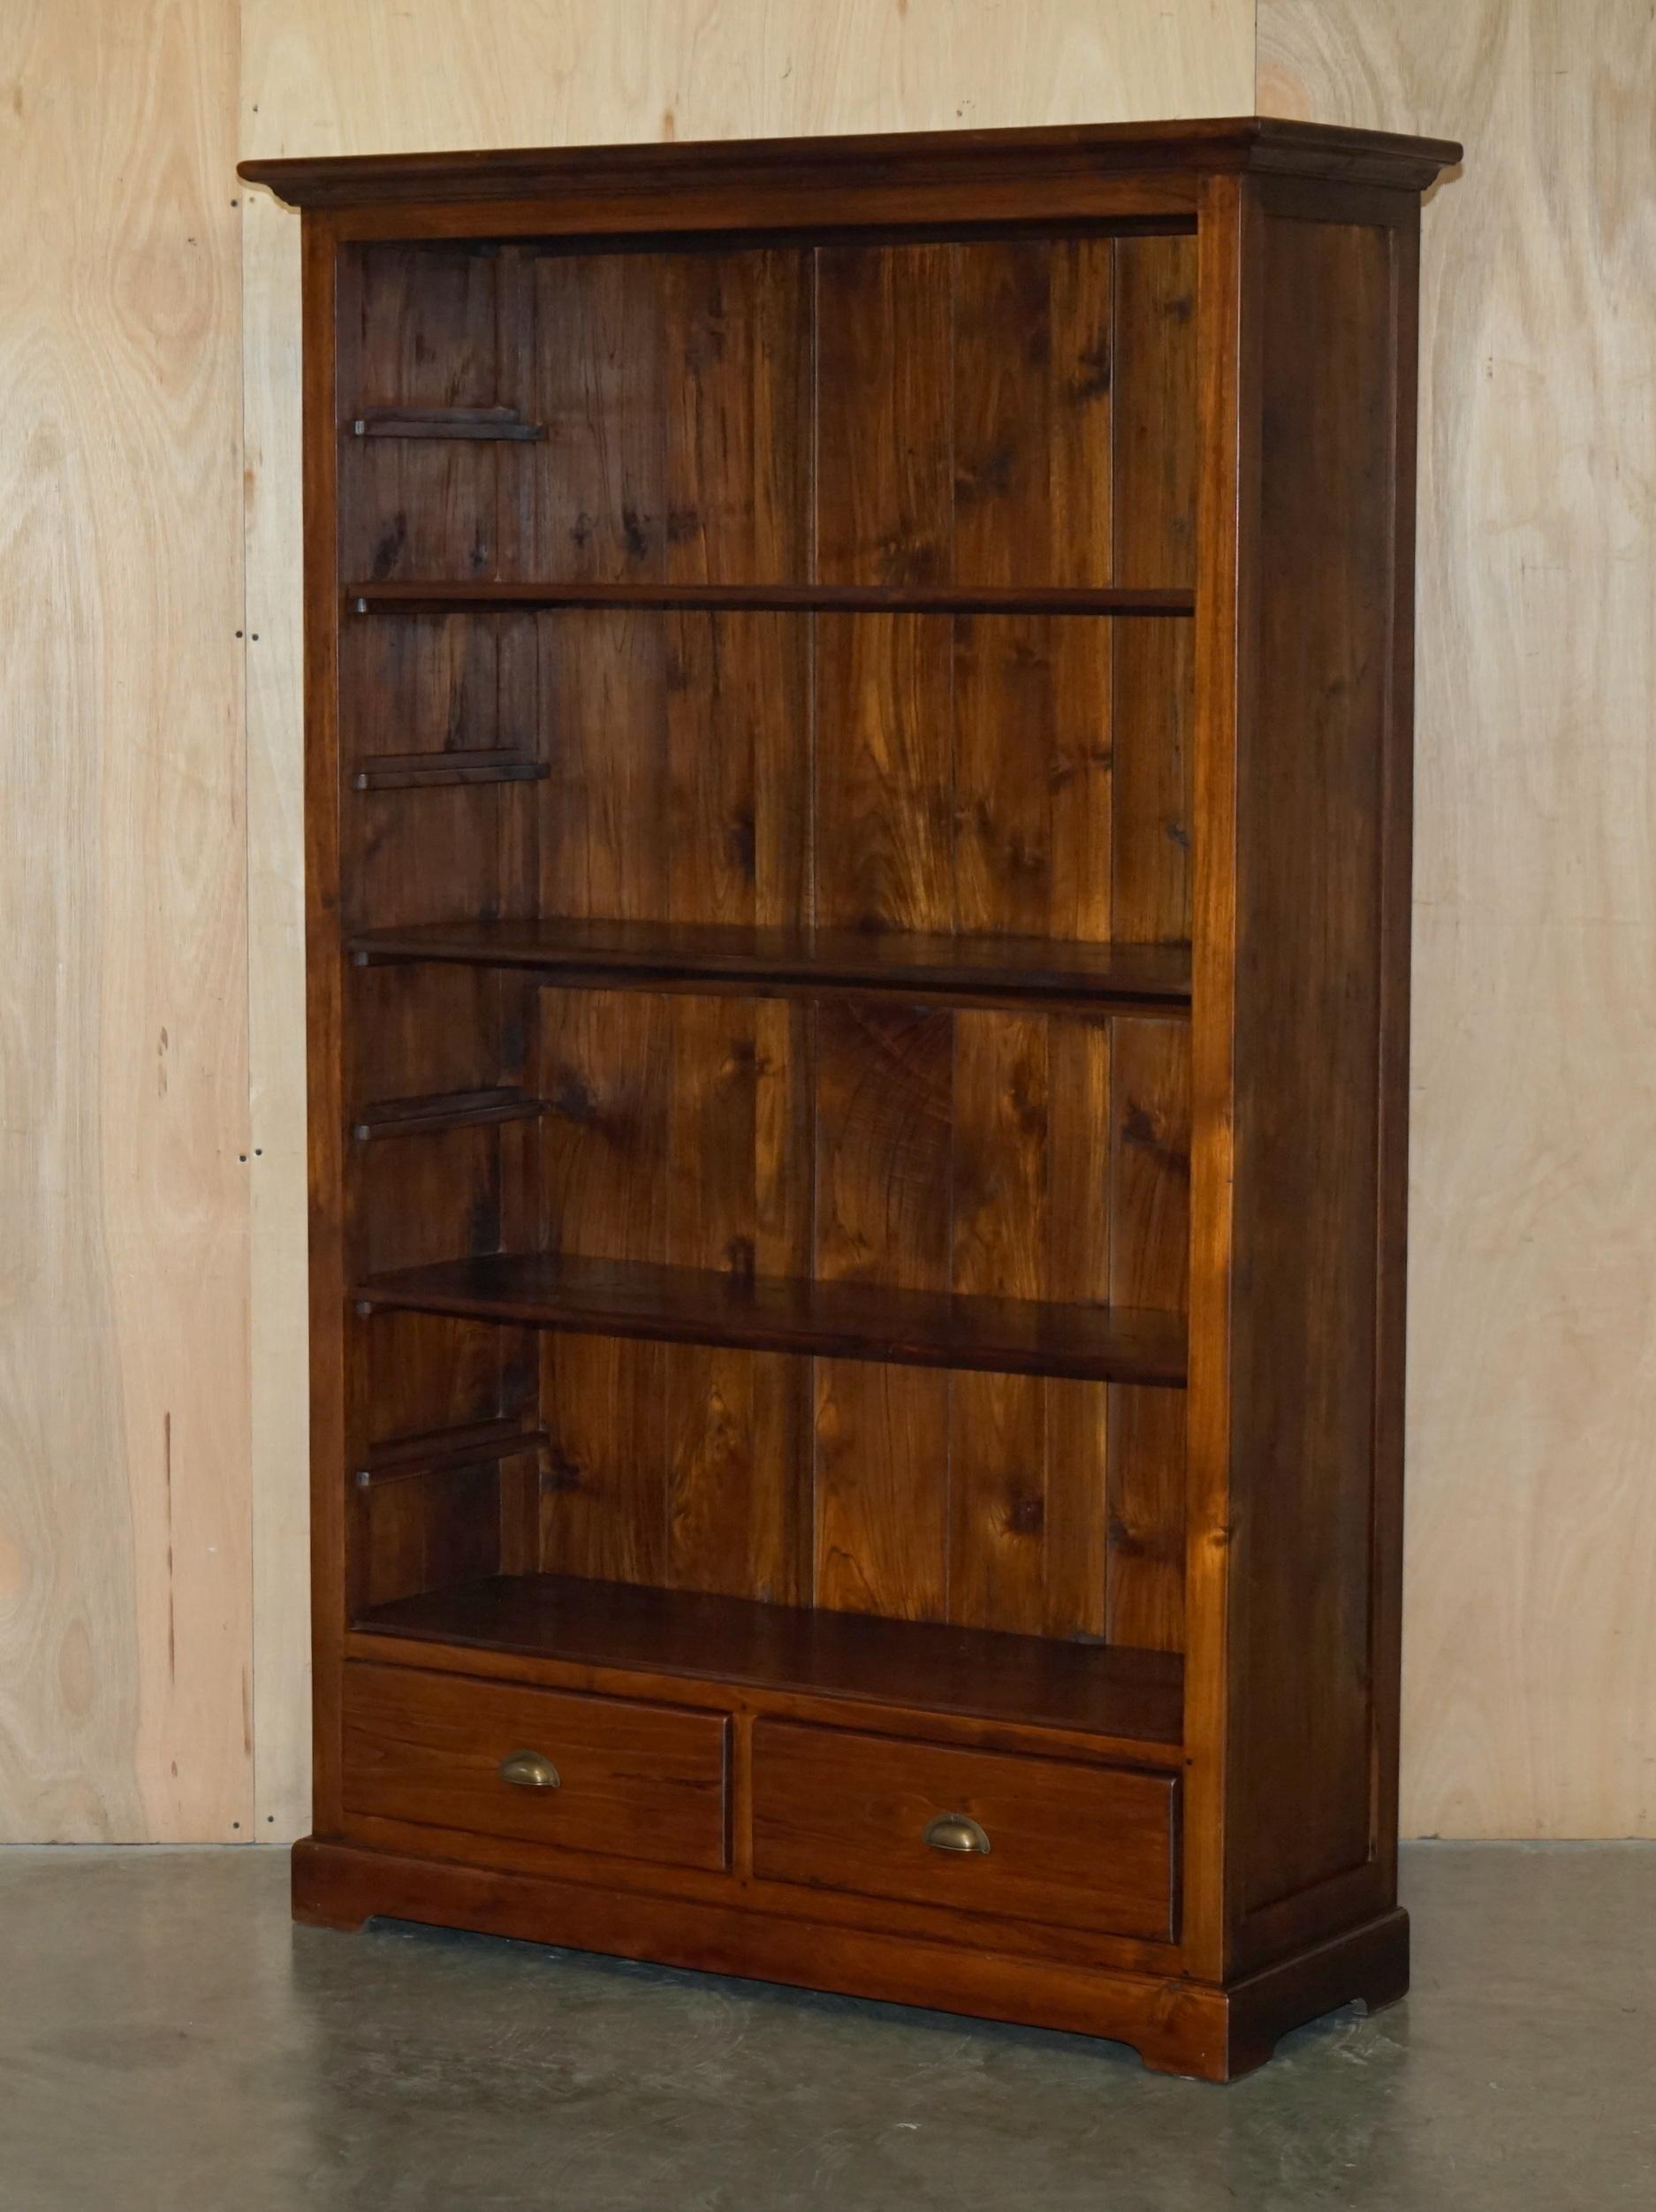 Royal House Antiques

Royal House Antiques is delighted to offer for sale this very good looking and well made pair of large English stained oak library bookcases with height adjustable shelves 

Please note the delivery fee listed is just a guide,